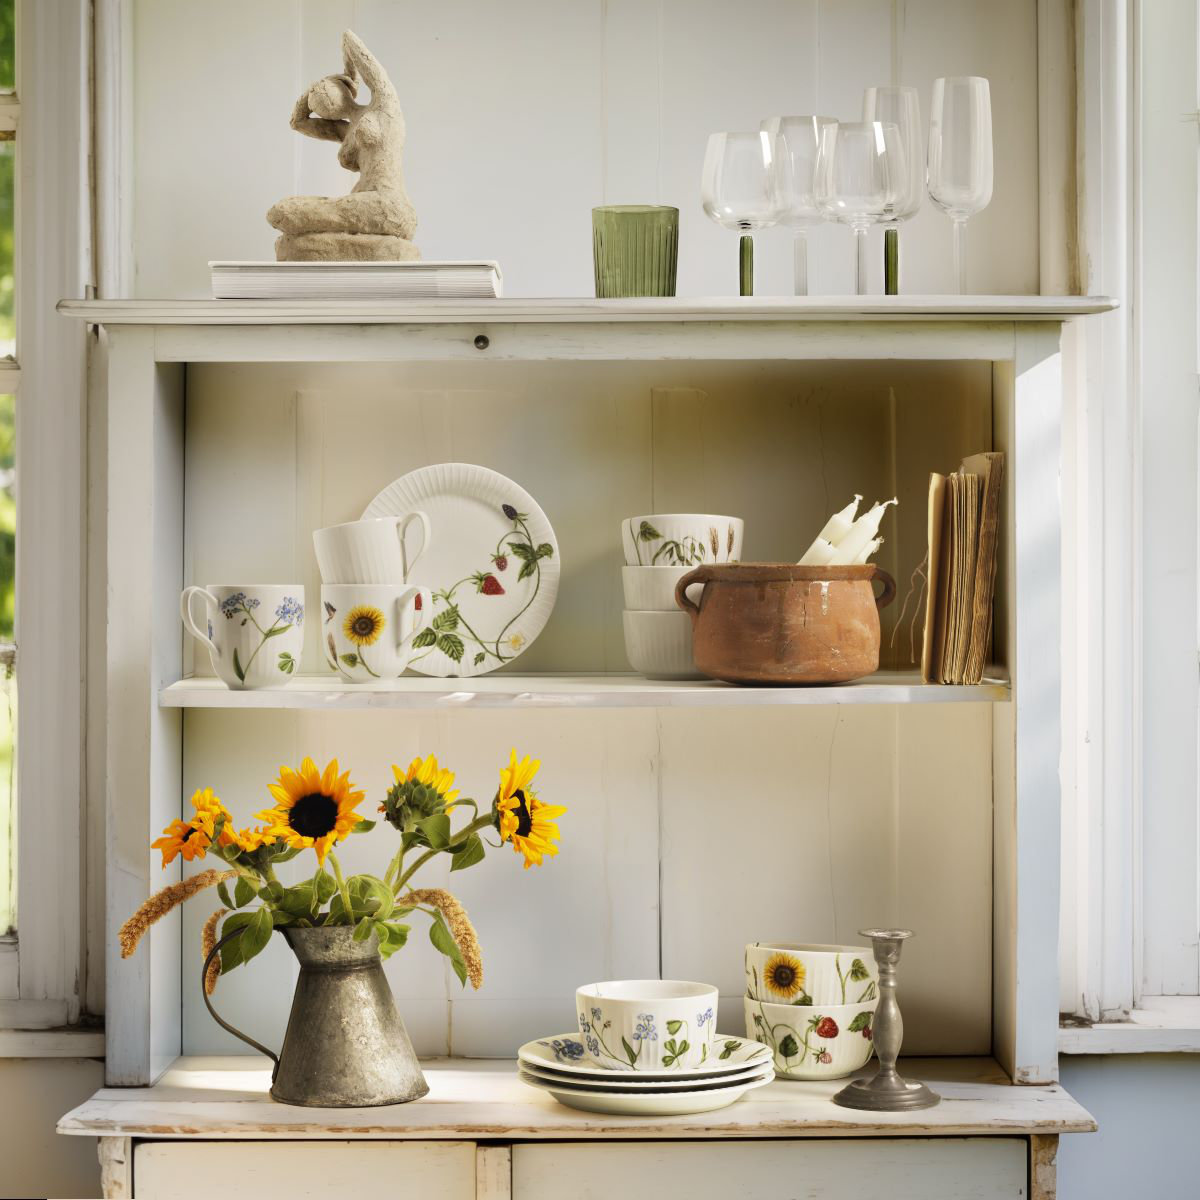 Tableware from the "Hammershøi Summer" collection by Kähler on a shelf